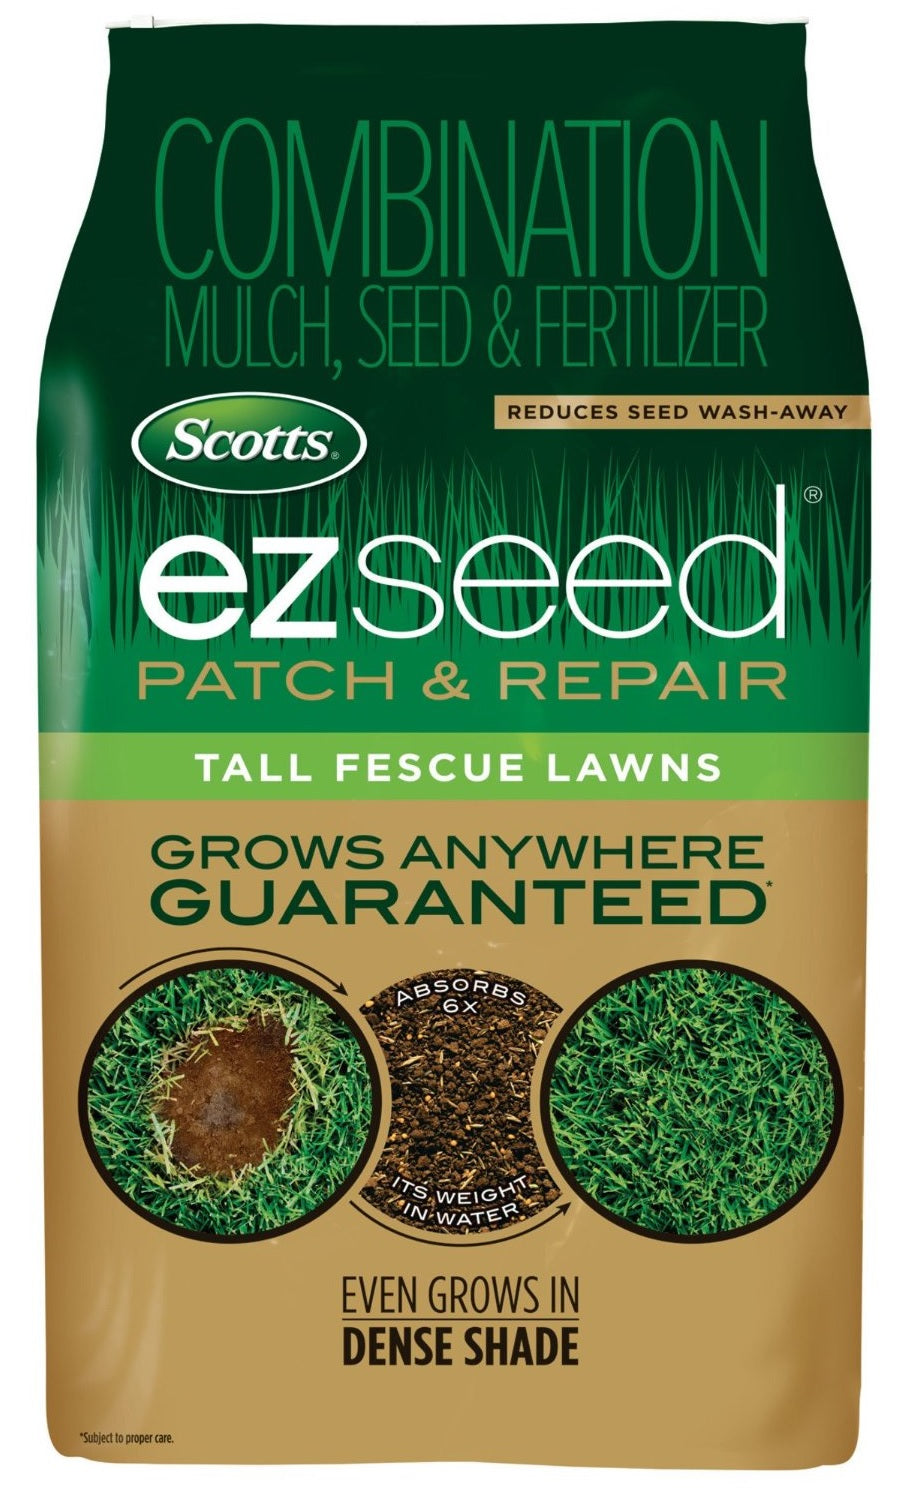 Buy scotts 17519 seed tall fescue lawns 10 lb - Online store for seed starting, grass  in USA, on sale, low price, discount deals, coupon code